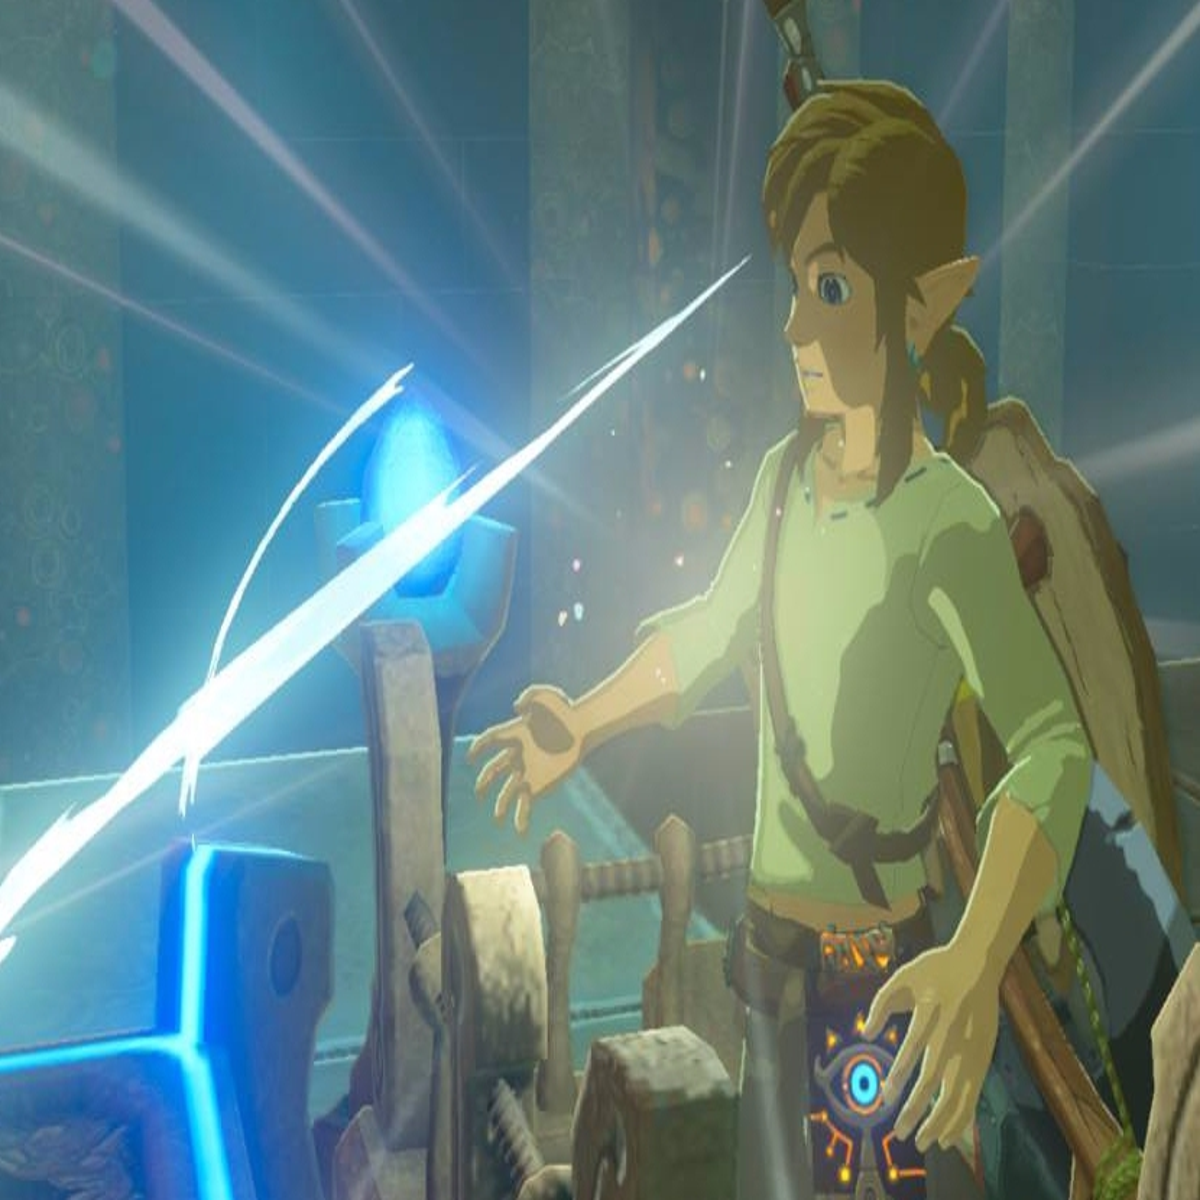 In A Link to the Past, One Moment Made Zelda Feel Truly Magical